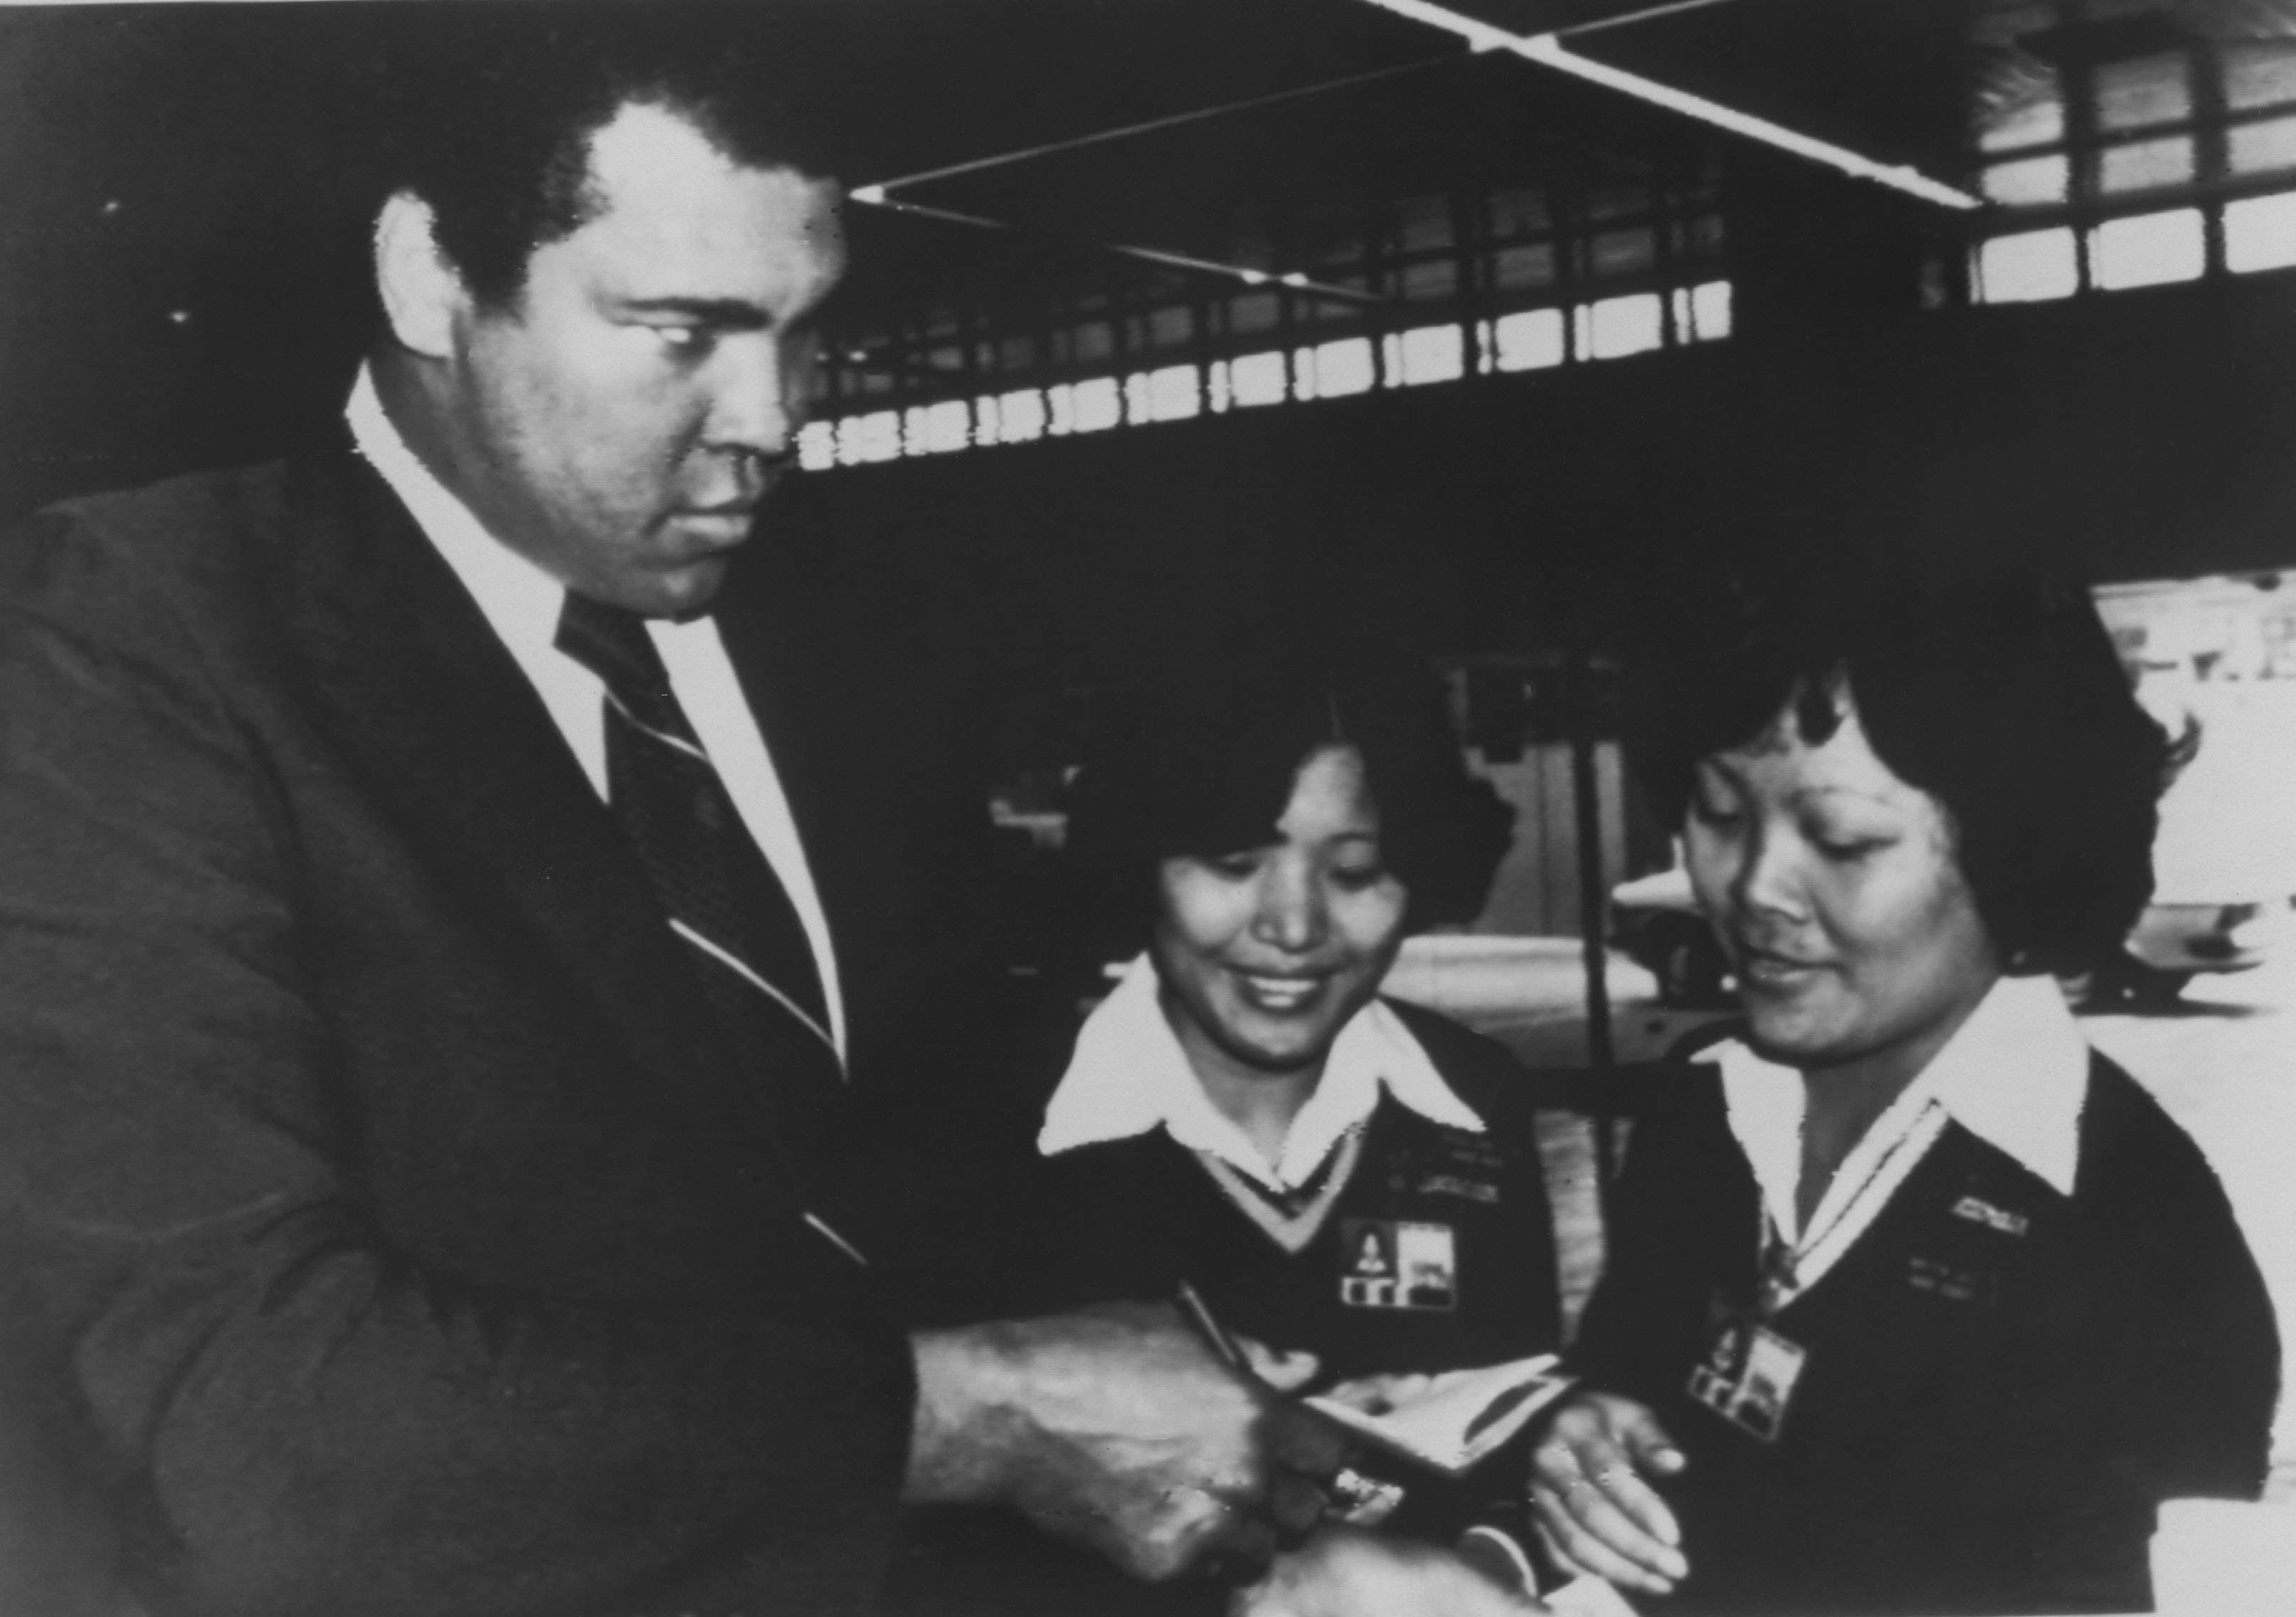 Muhammad Ali playfully glares at two women security guards as they check his travel documents at Hong Kong’s Kai Tak airport in December 1979 while on his way to mainland China. Photo: AP